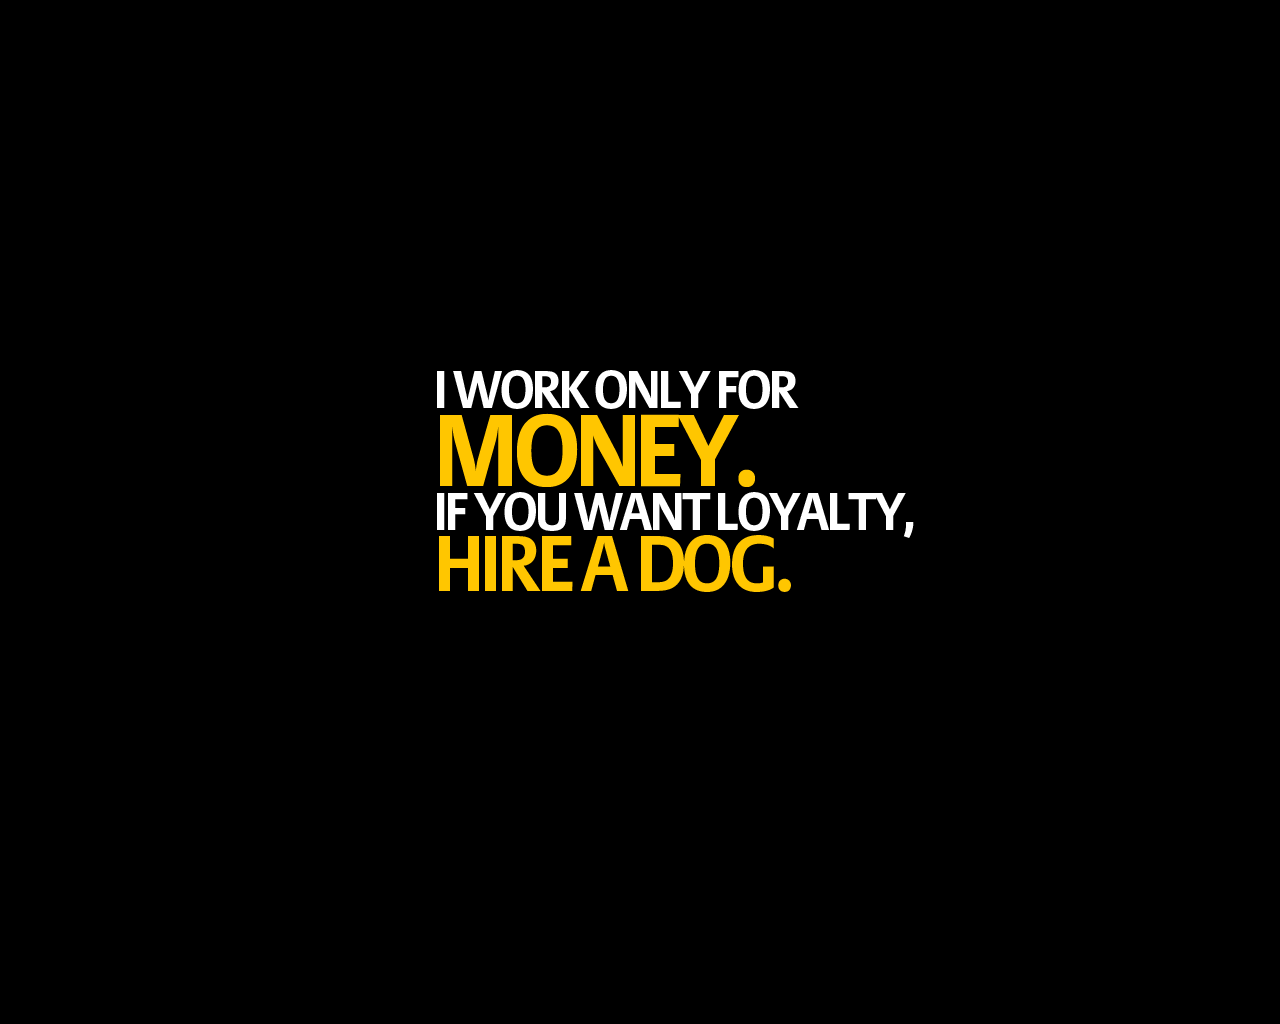 Hire a DOG